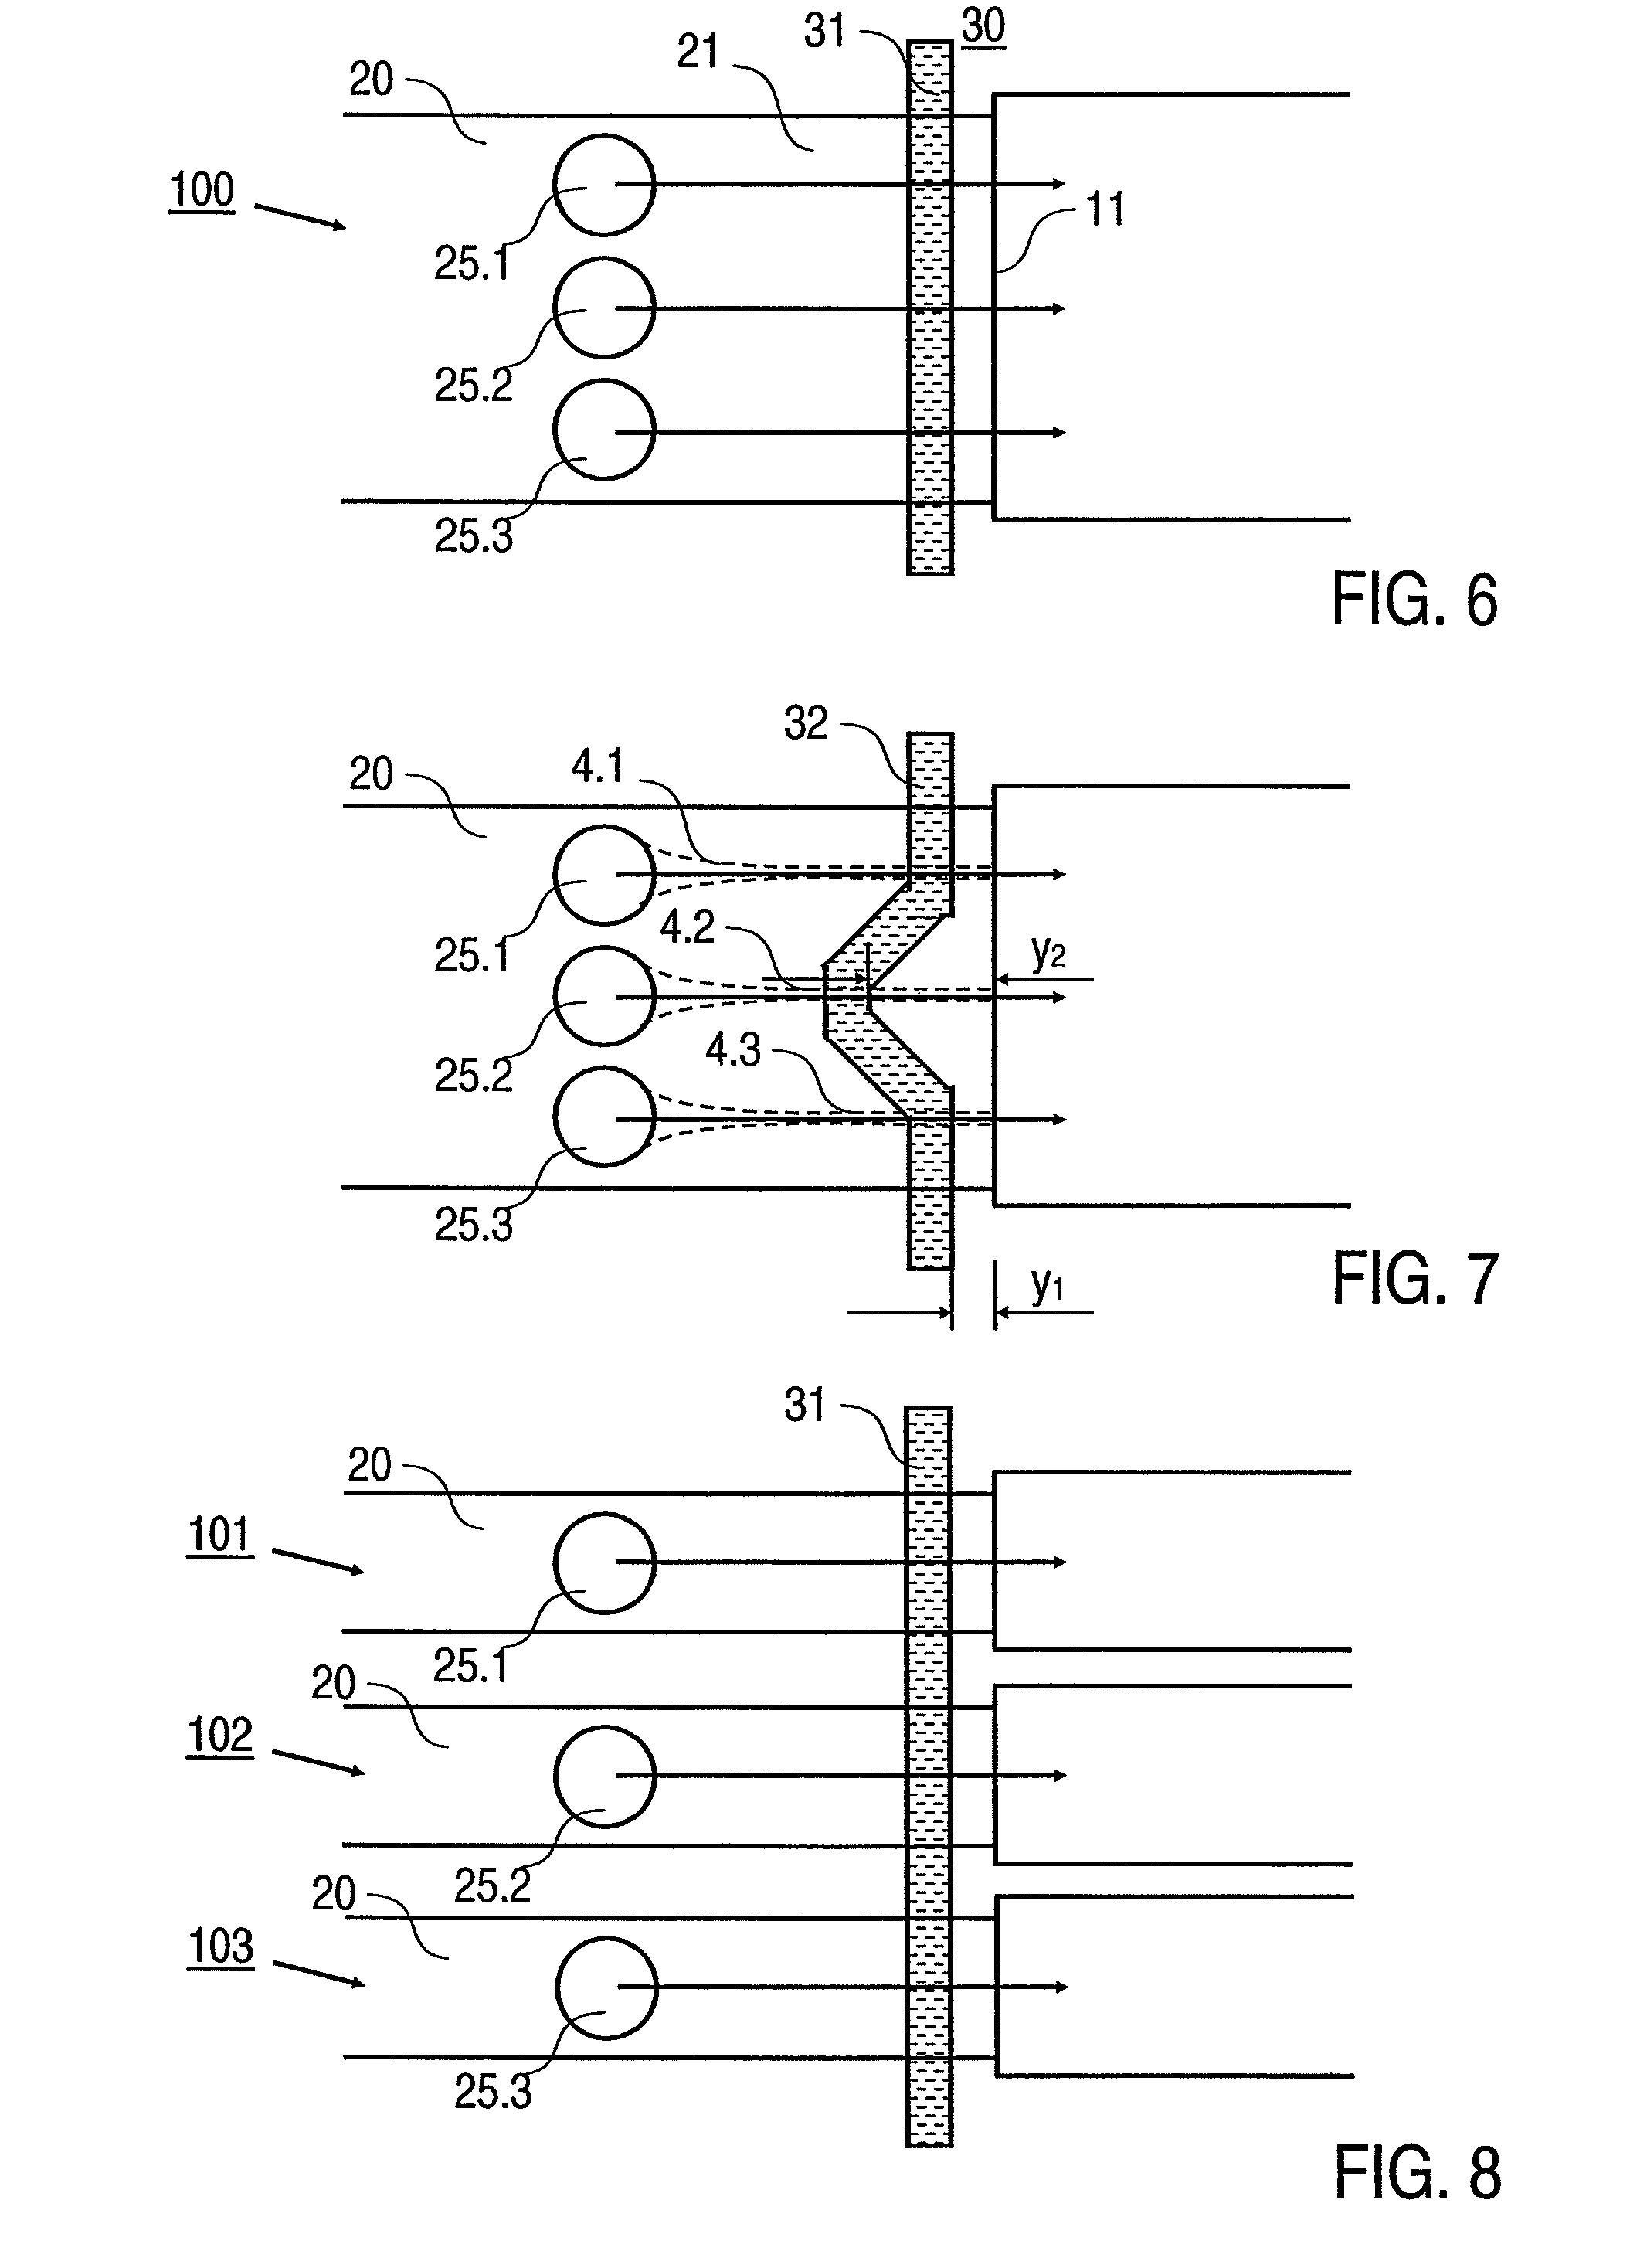 Formation of an emulsion in a fluid microsystem